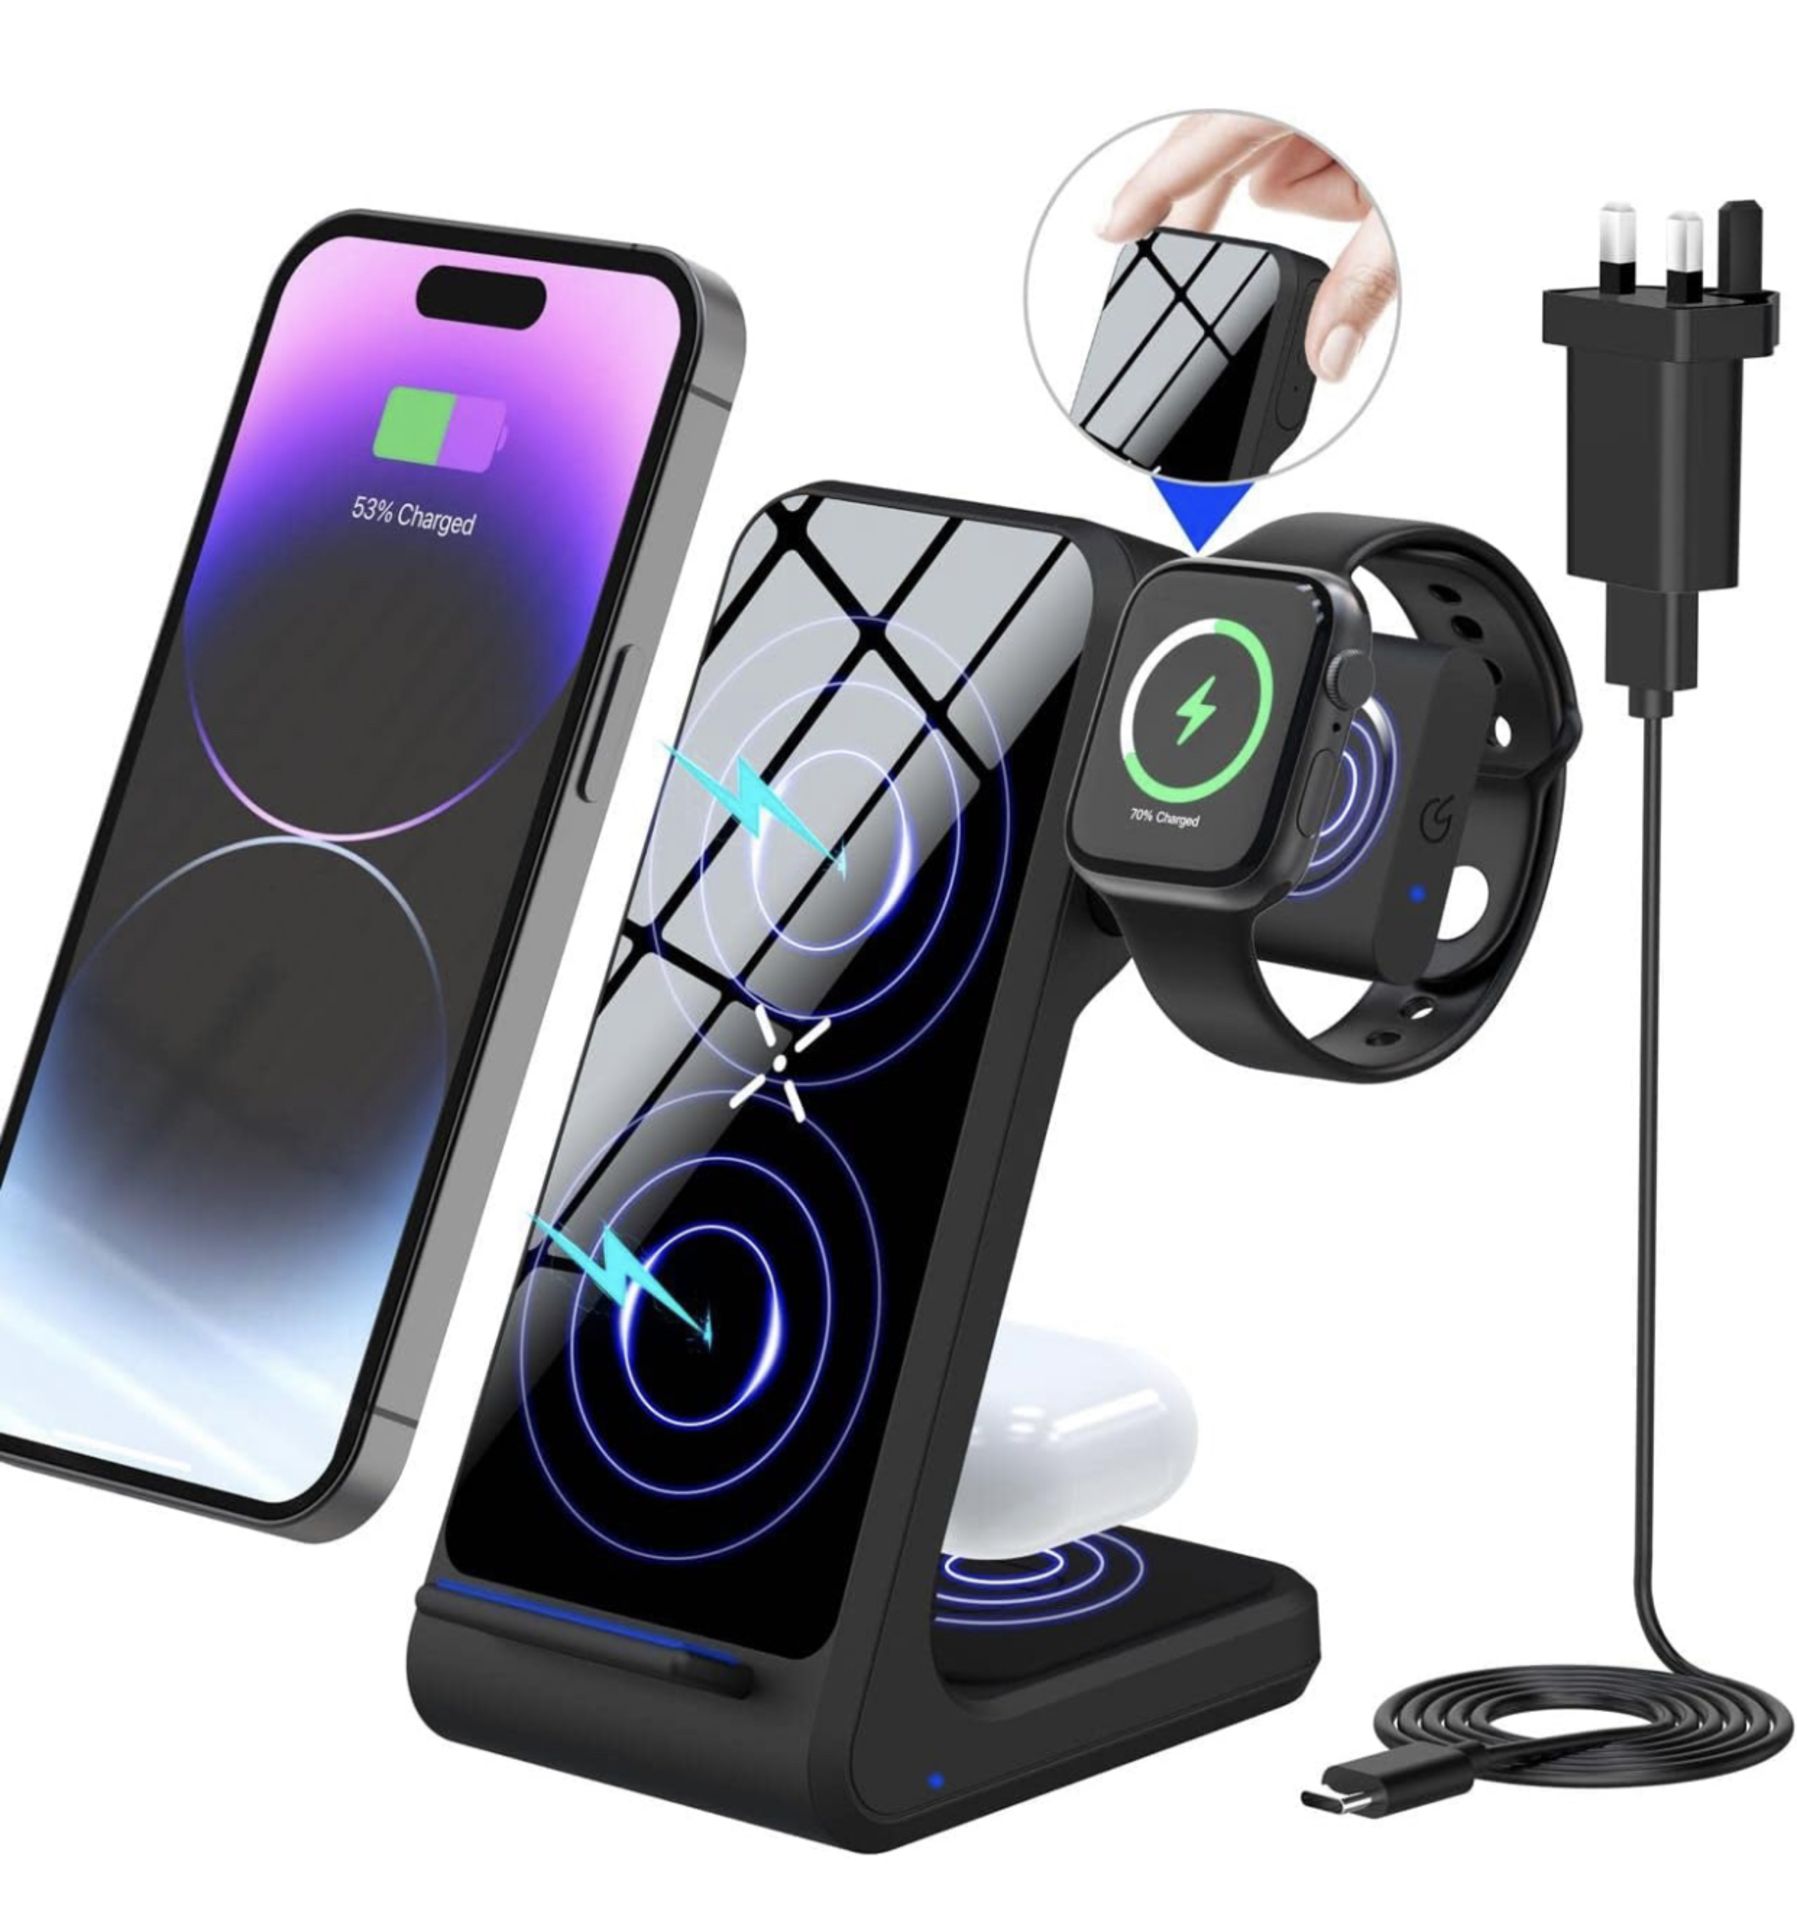 RRP £22.99 Feir Wireless Charger Fast 3-In-1 Charging Station Pop-Up Watch Charging Stand